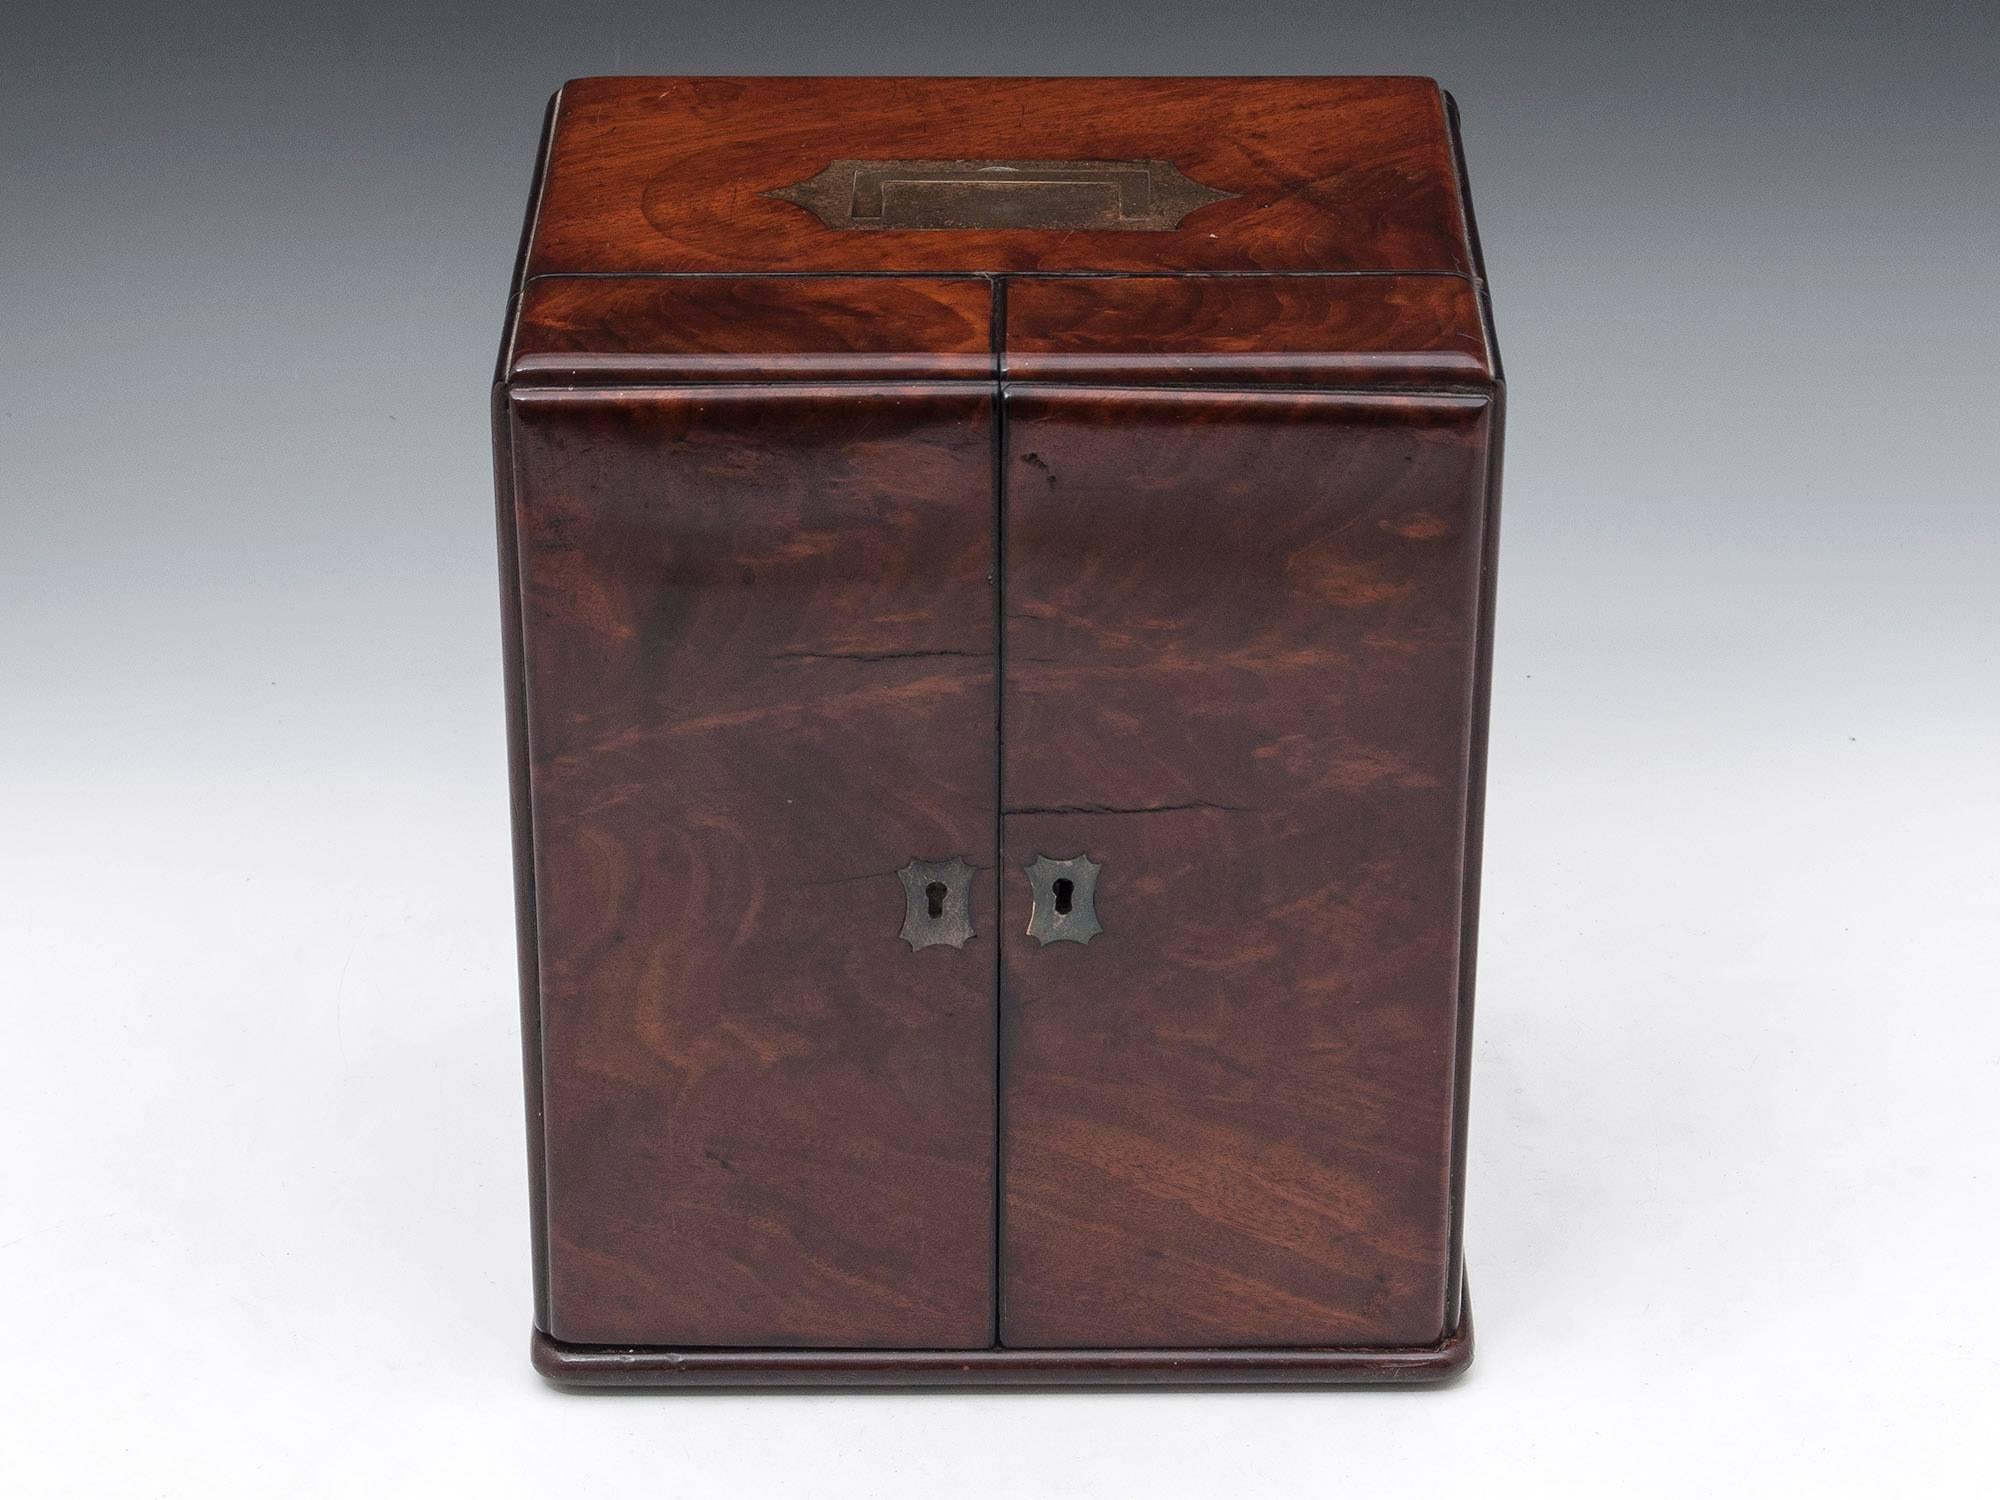 Early Victorian apothecary box in beautiful flame mahogany, with a flush-fitting Campaign brass carrying handle. It has double-opening lockable doors, two fitted drawers and a secret concealed medicine compartment to the back.
 
Inset to the front